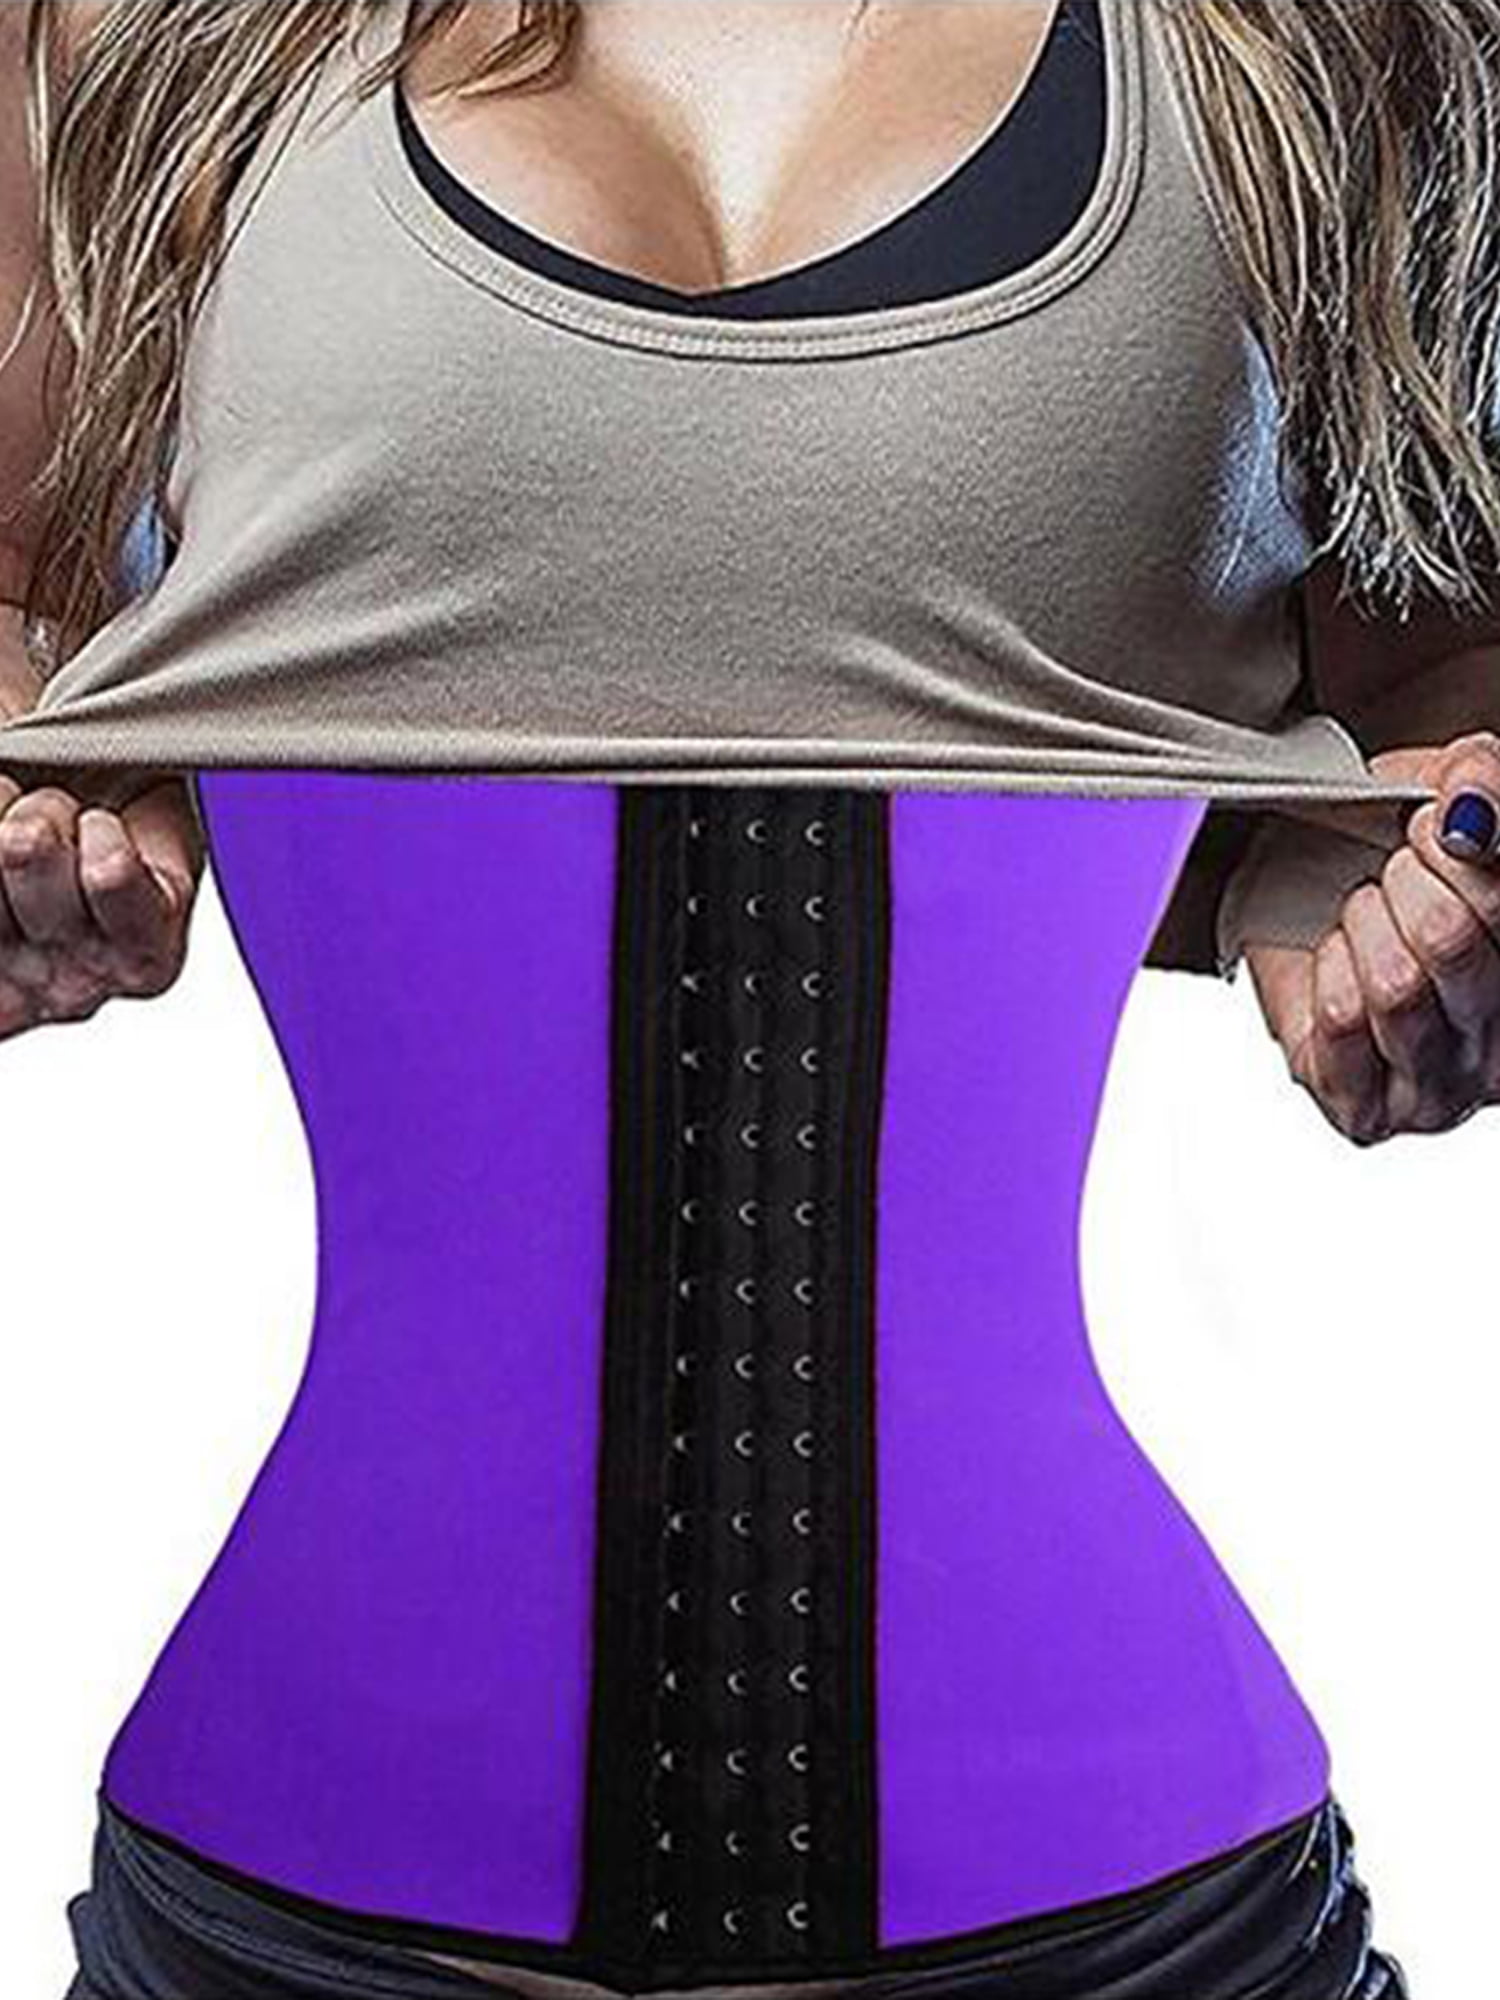 30 Minute Corset To Workout with Comfort Workout Clothes